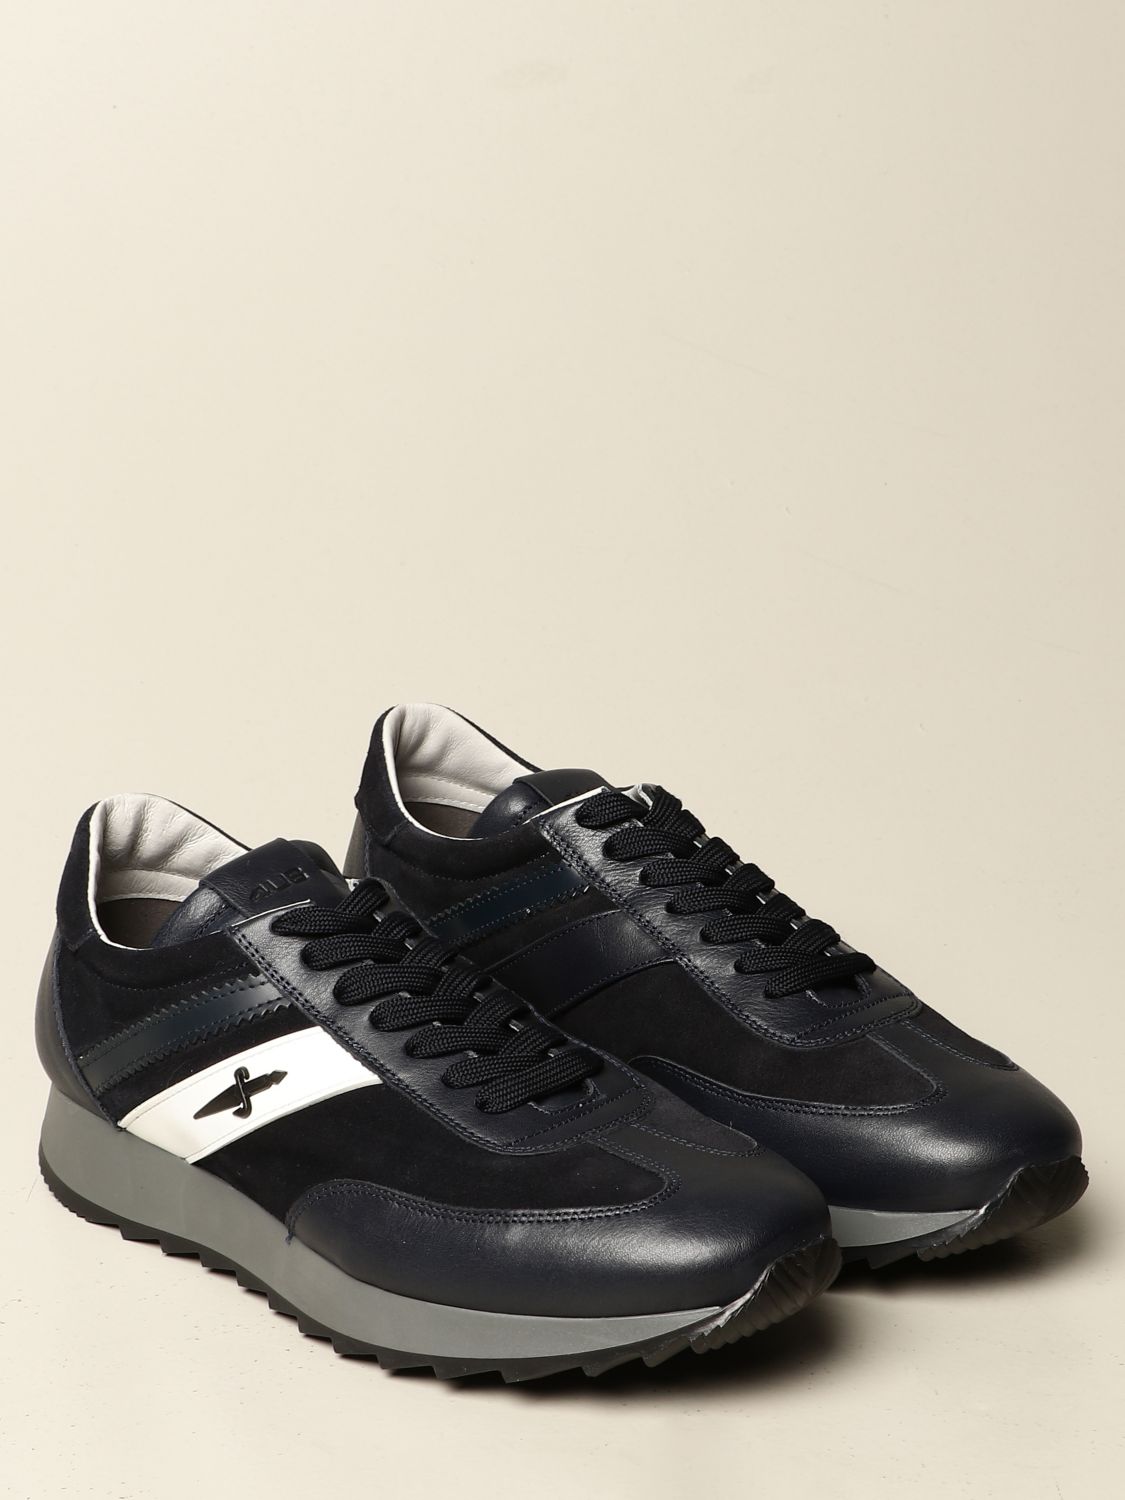 Paciotti 4Us Outlet: sneakers in suede and leather - Blue | Paciotti ...